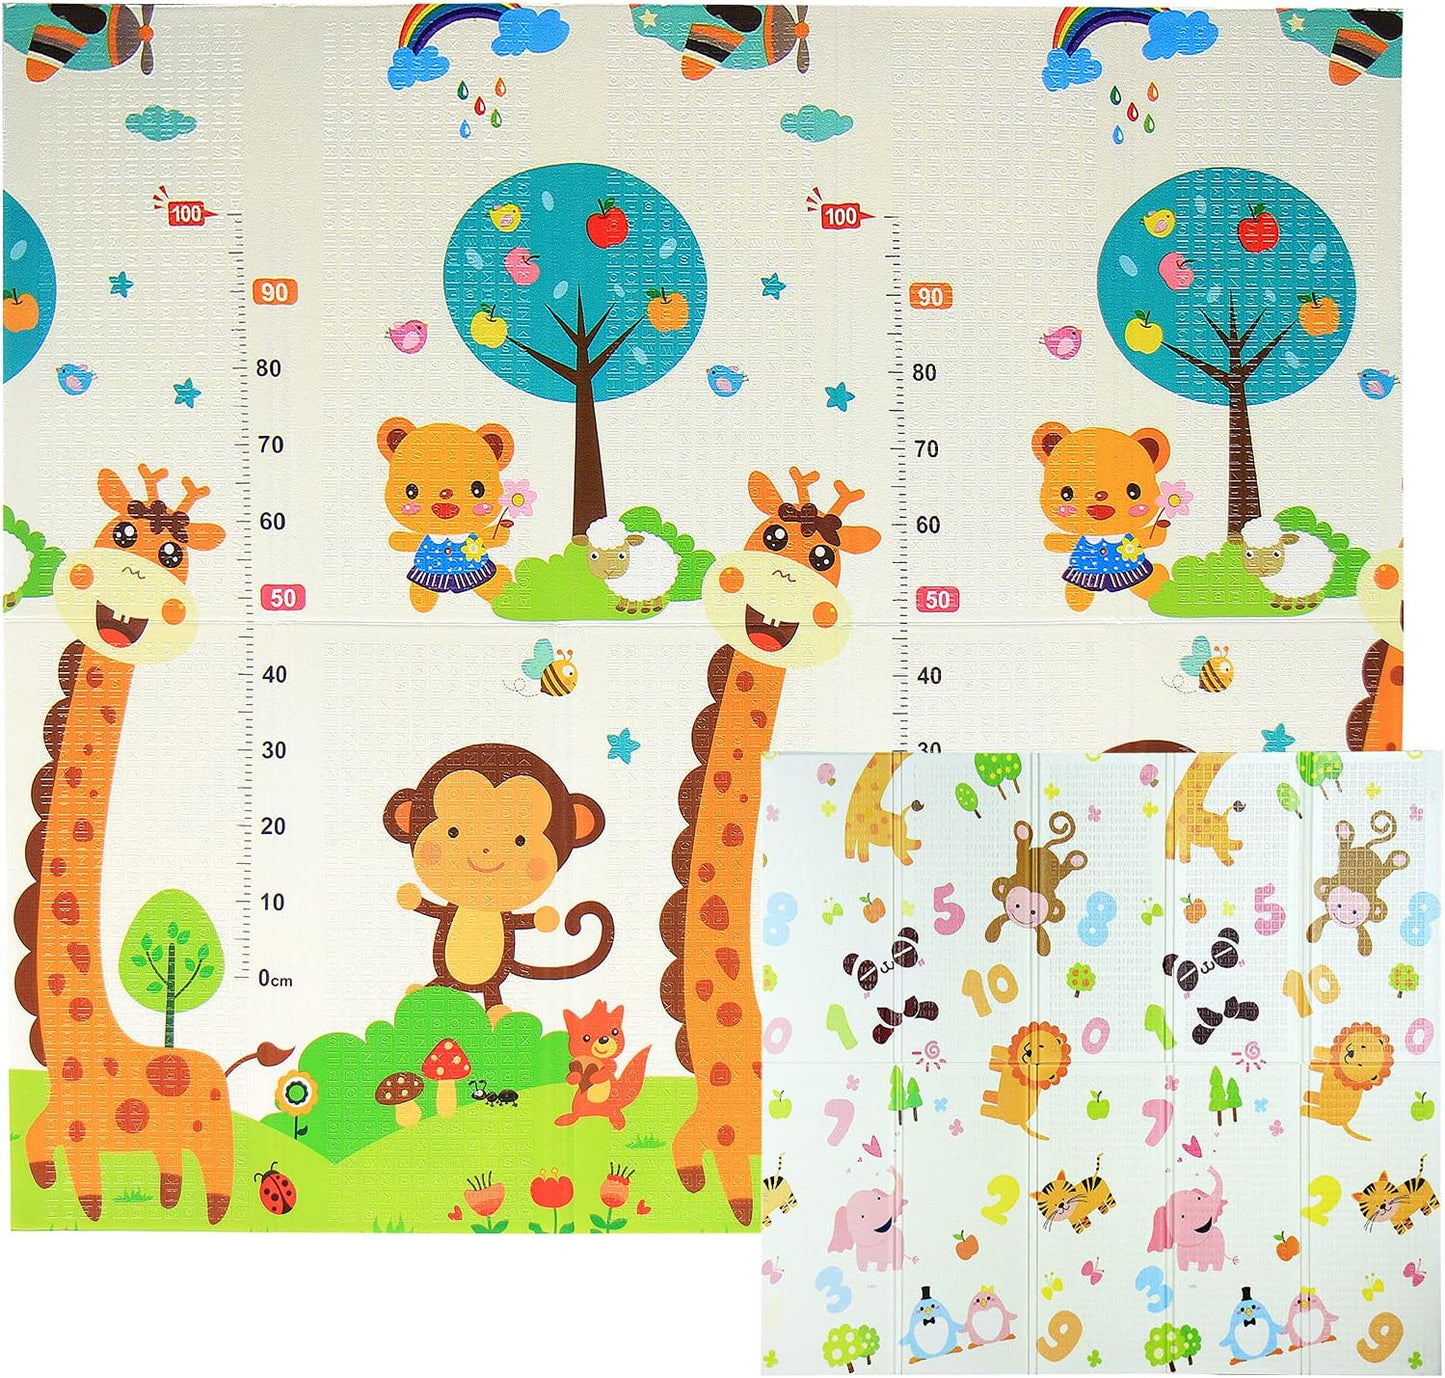 Baby Play Mat, Foam Playmat for Baby Floor Play Baby Crawling Mat Soft Non-Slip Foldable Waterproof Reversible Toxic Free